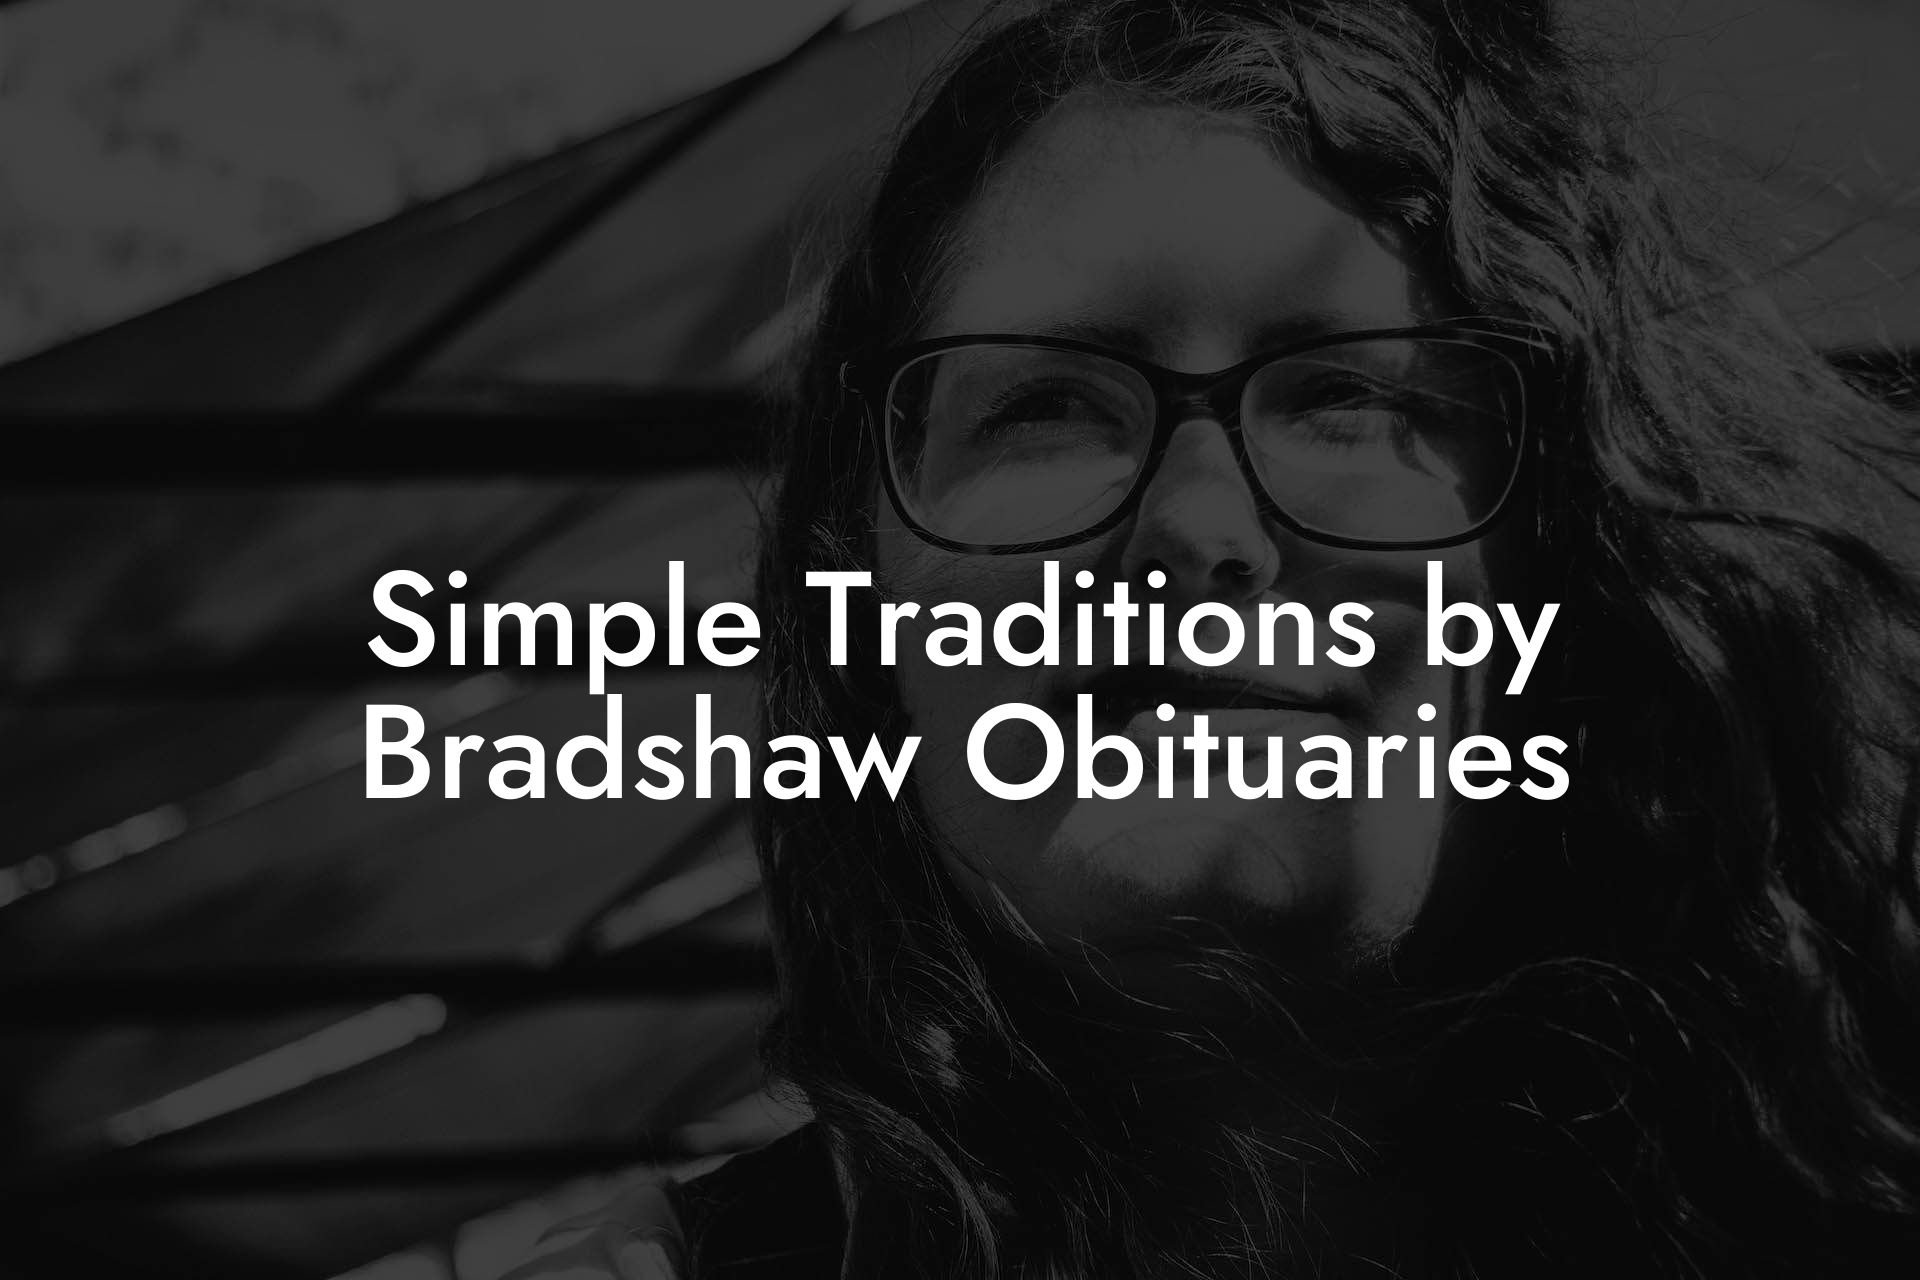 Simple Traditions by Bradshaw Obituaries